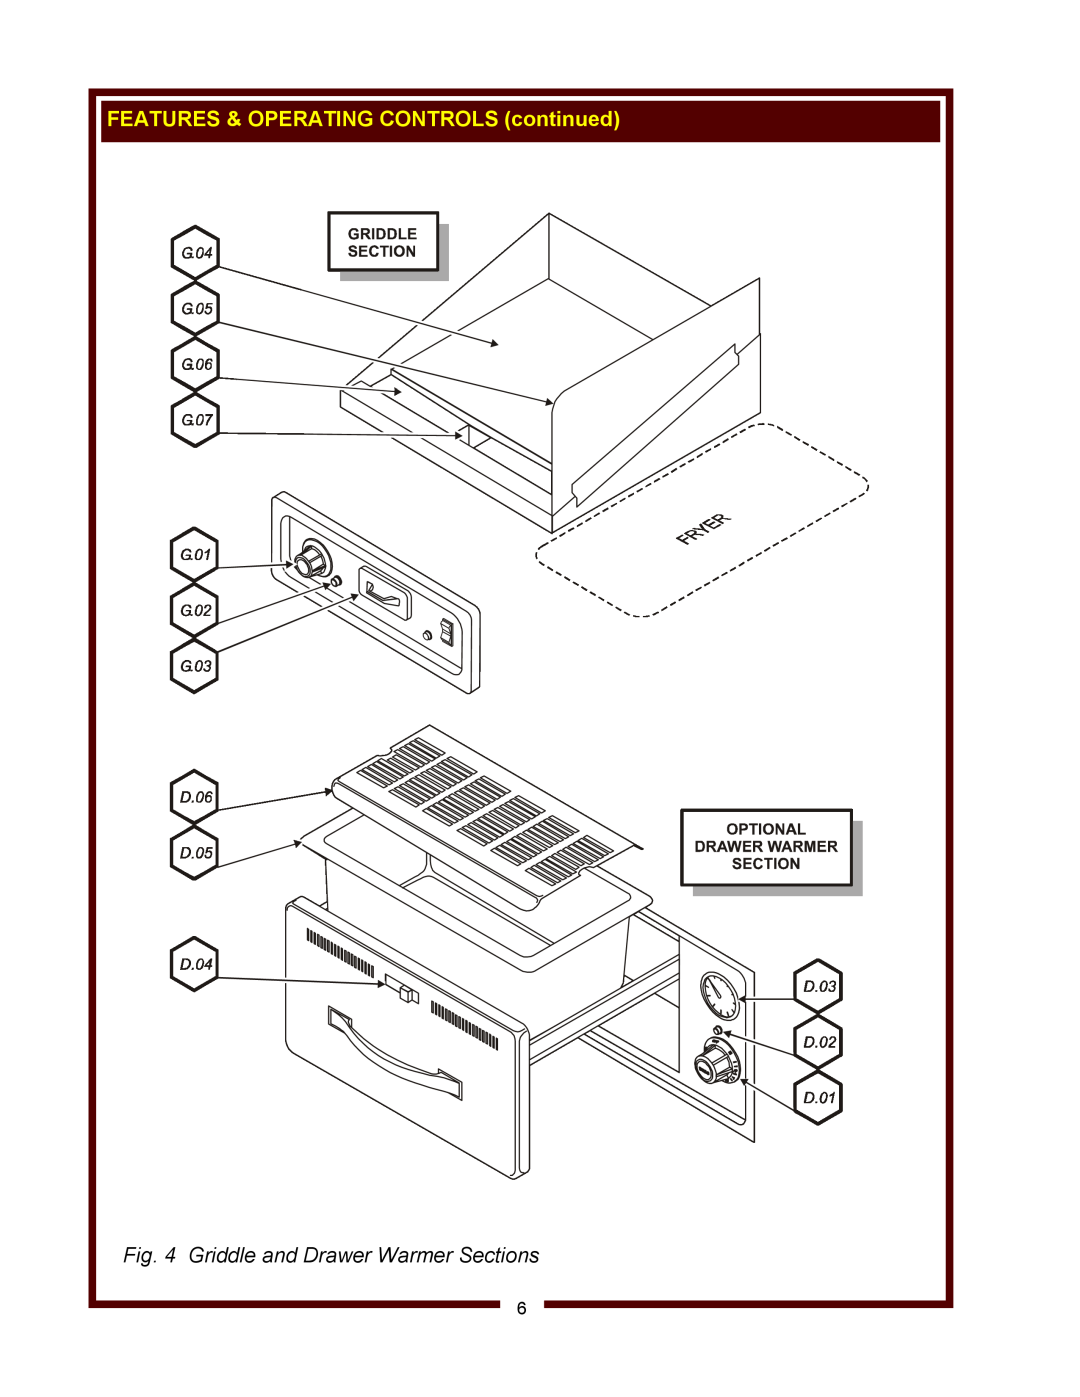 Wells WV-FGRW operation manual Griddle and Drawer Warmer Sections, FEATURES & OPERATING CONTROLS continued 